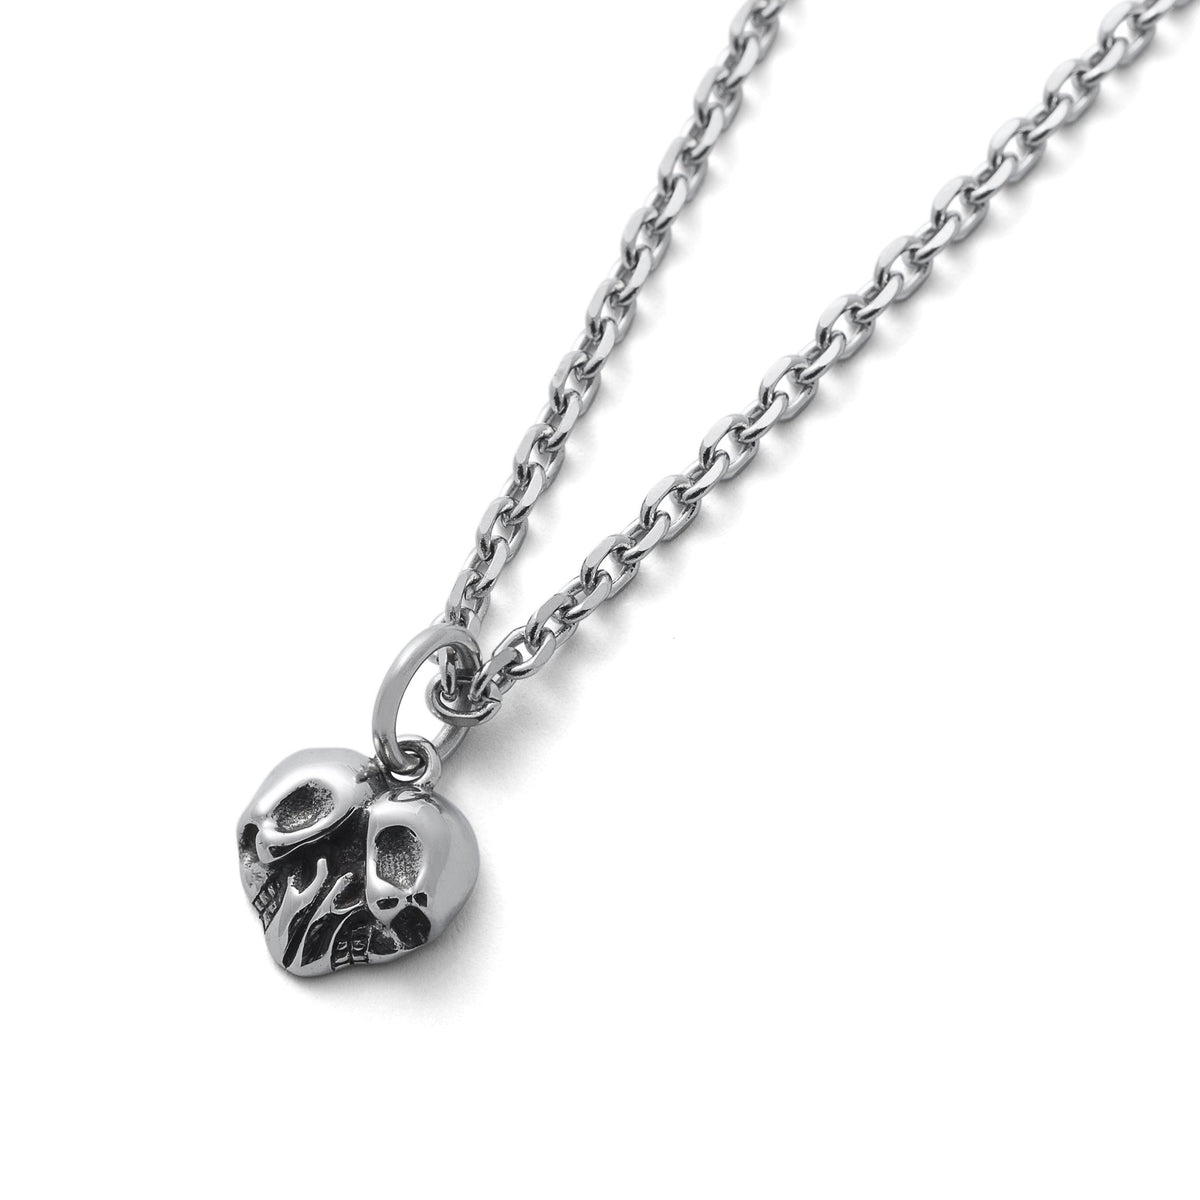 Skull Heart Mens Pendant Necklace by Statement Collective_01